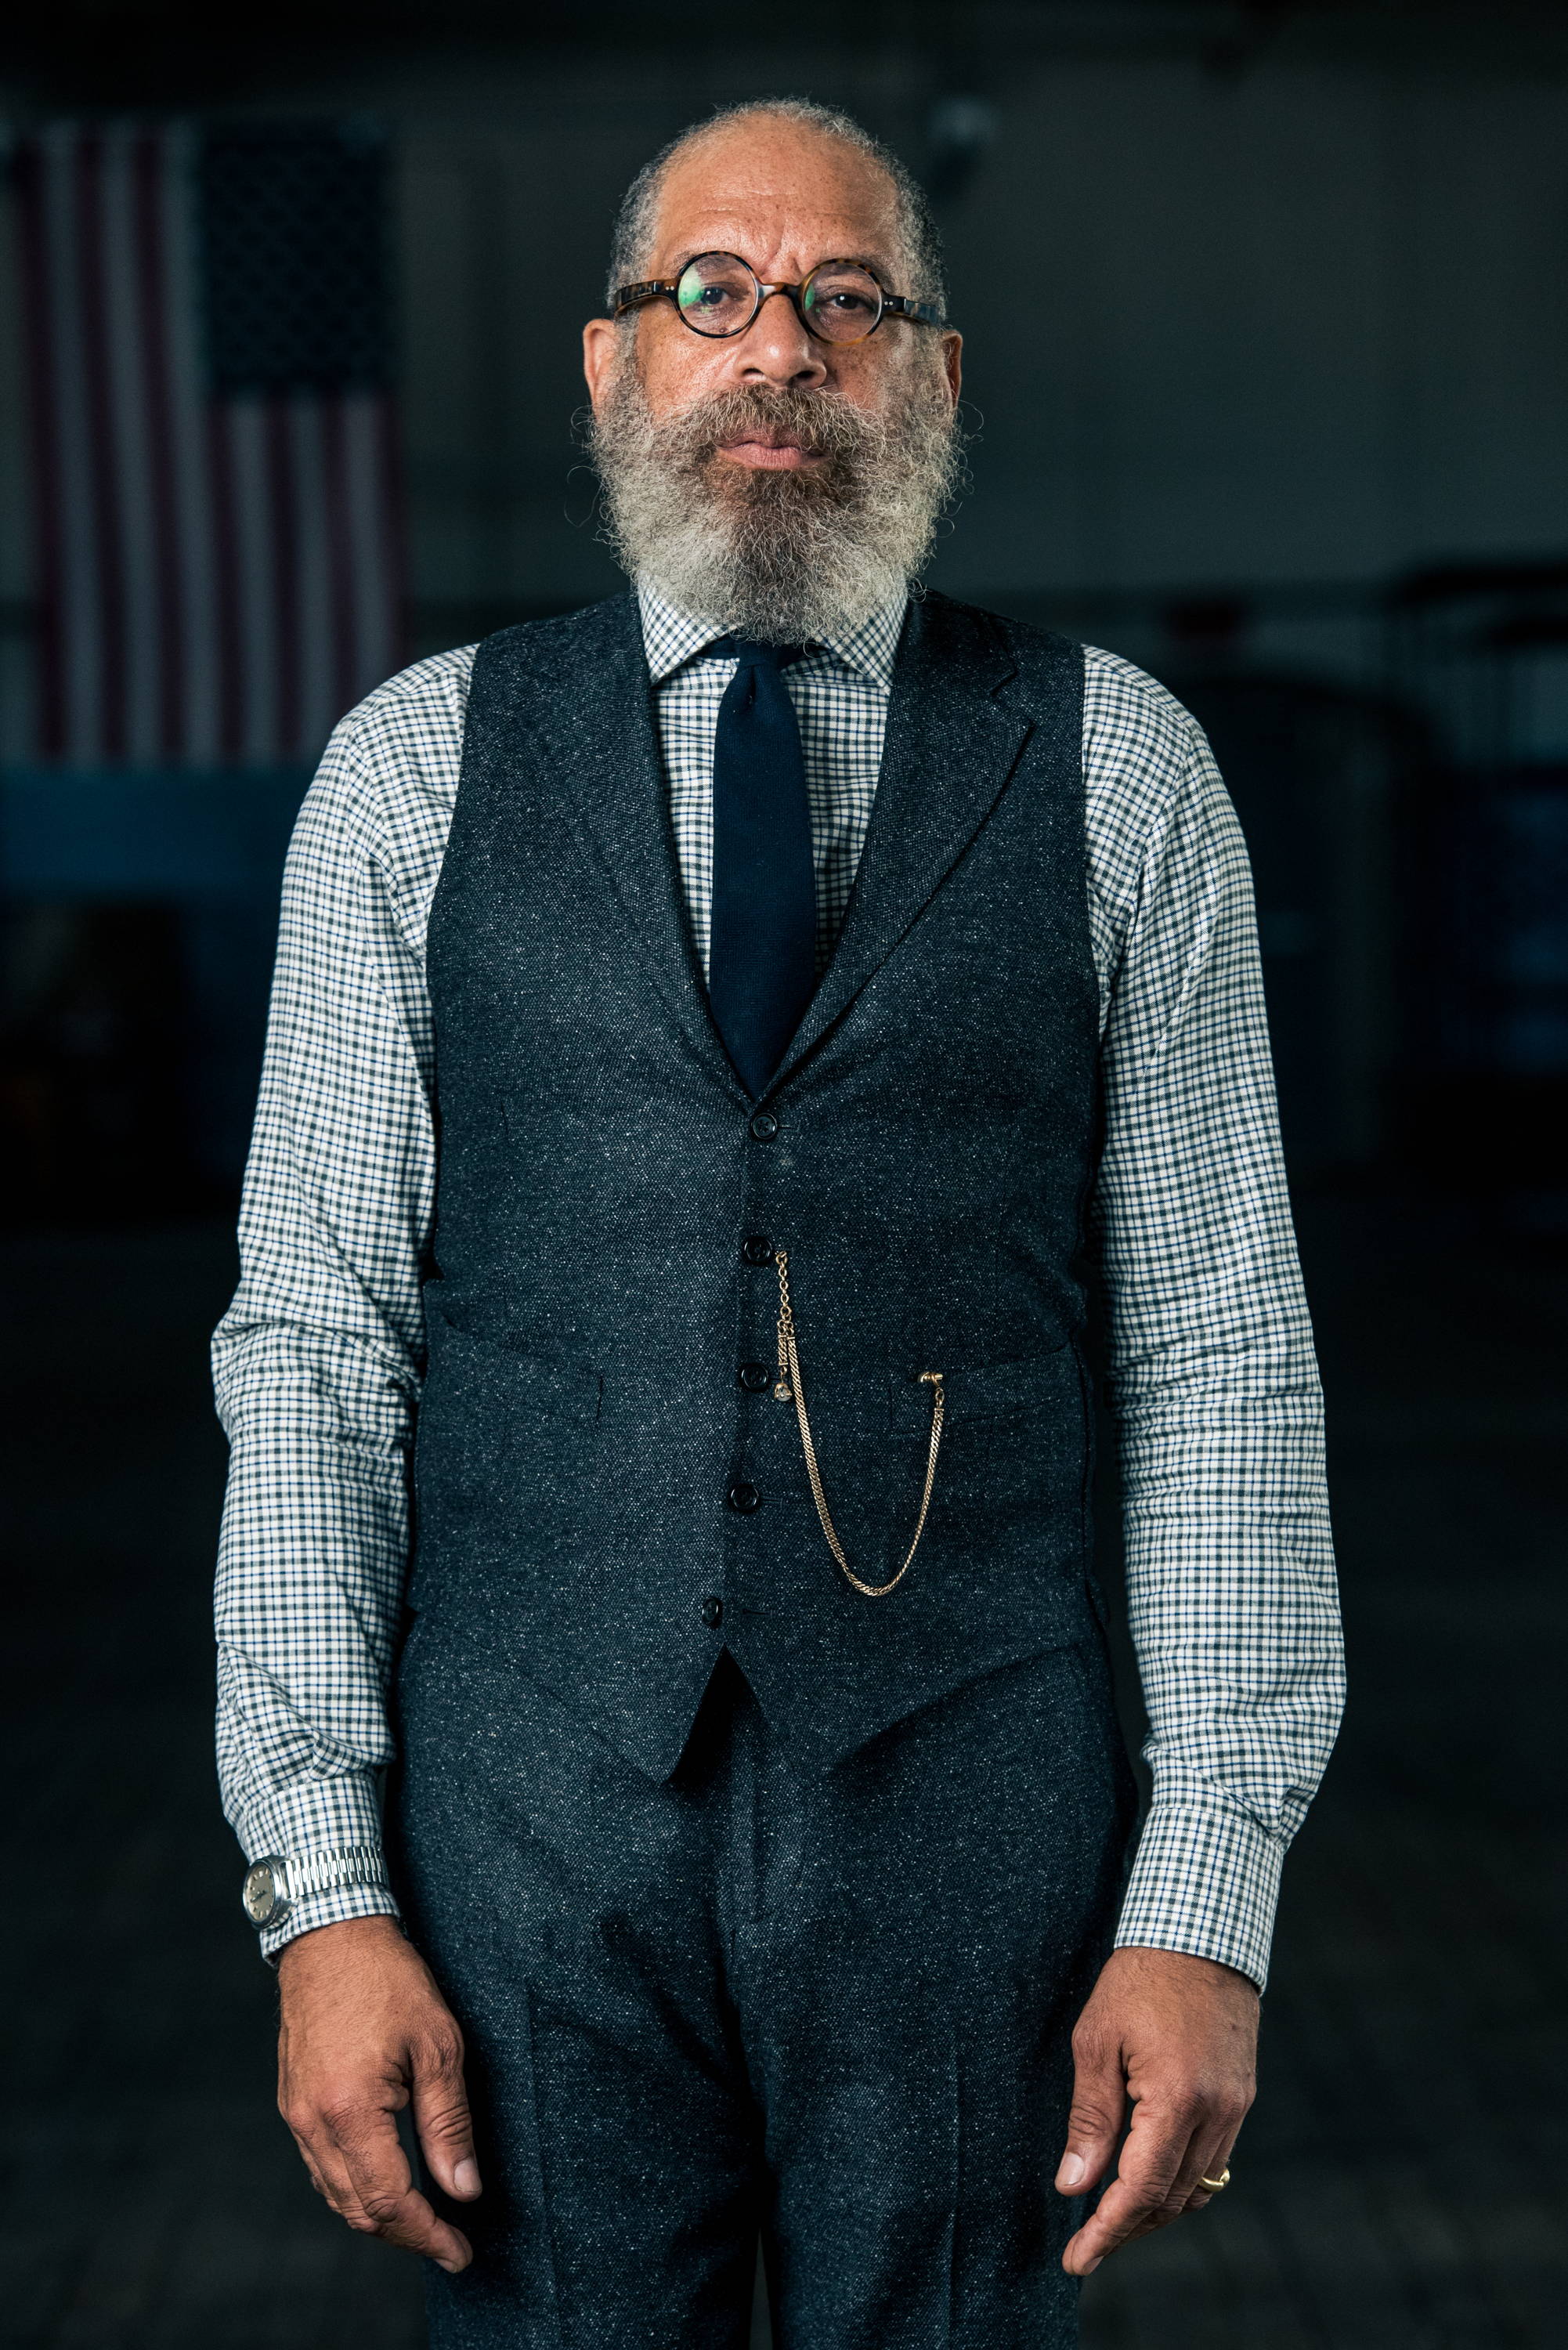 Articles of Style | HOW IT SHOULD FIT: THE WAISTCOAT (OR “VEST”)